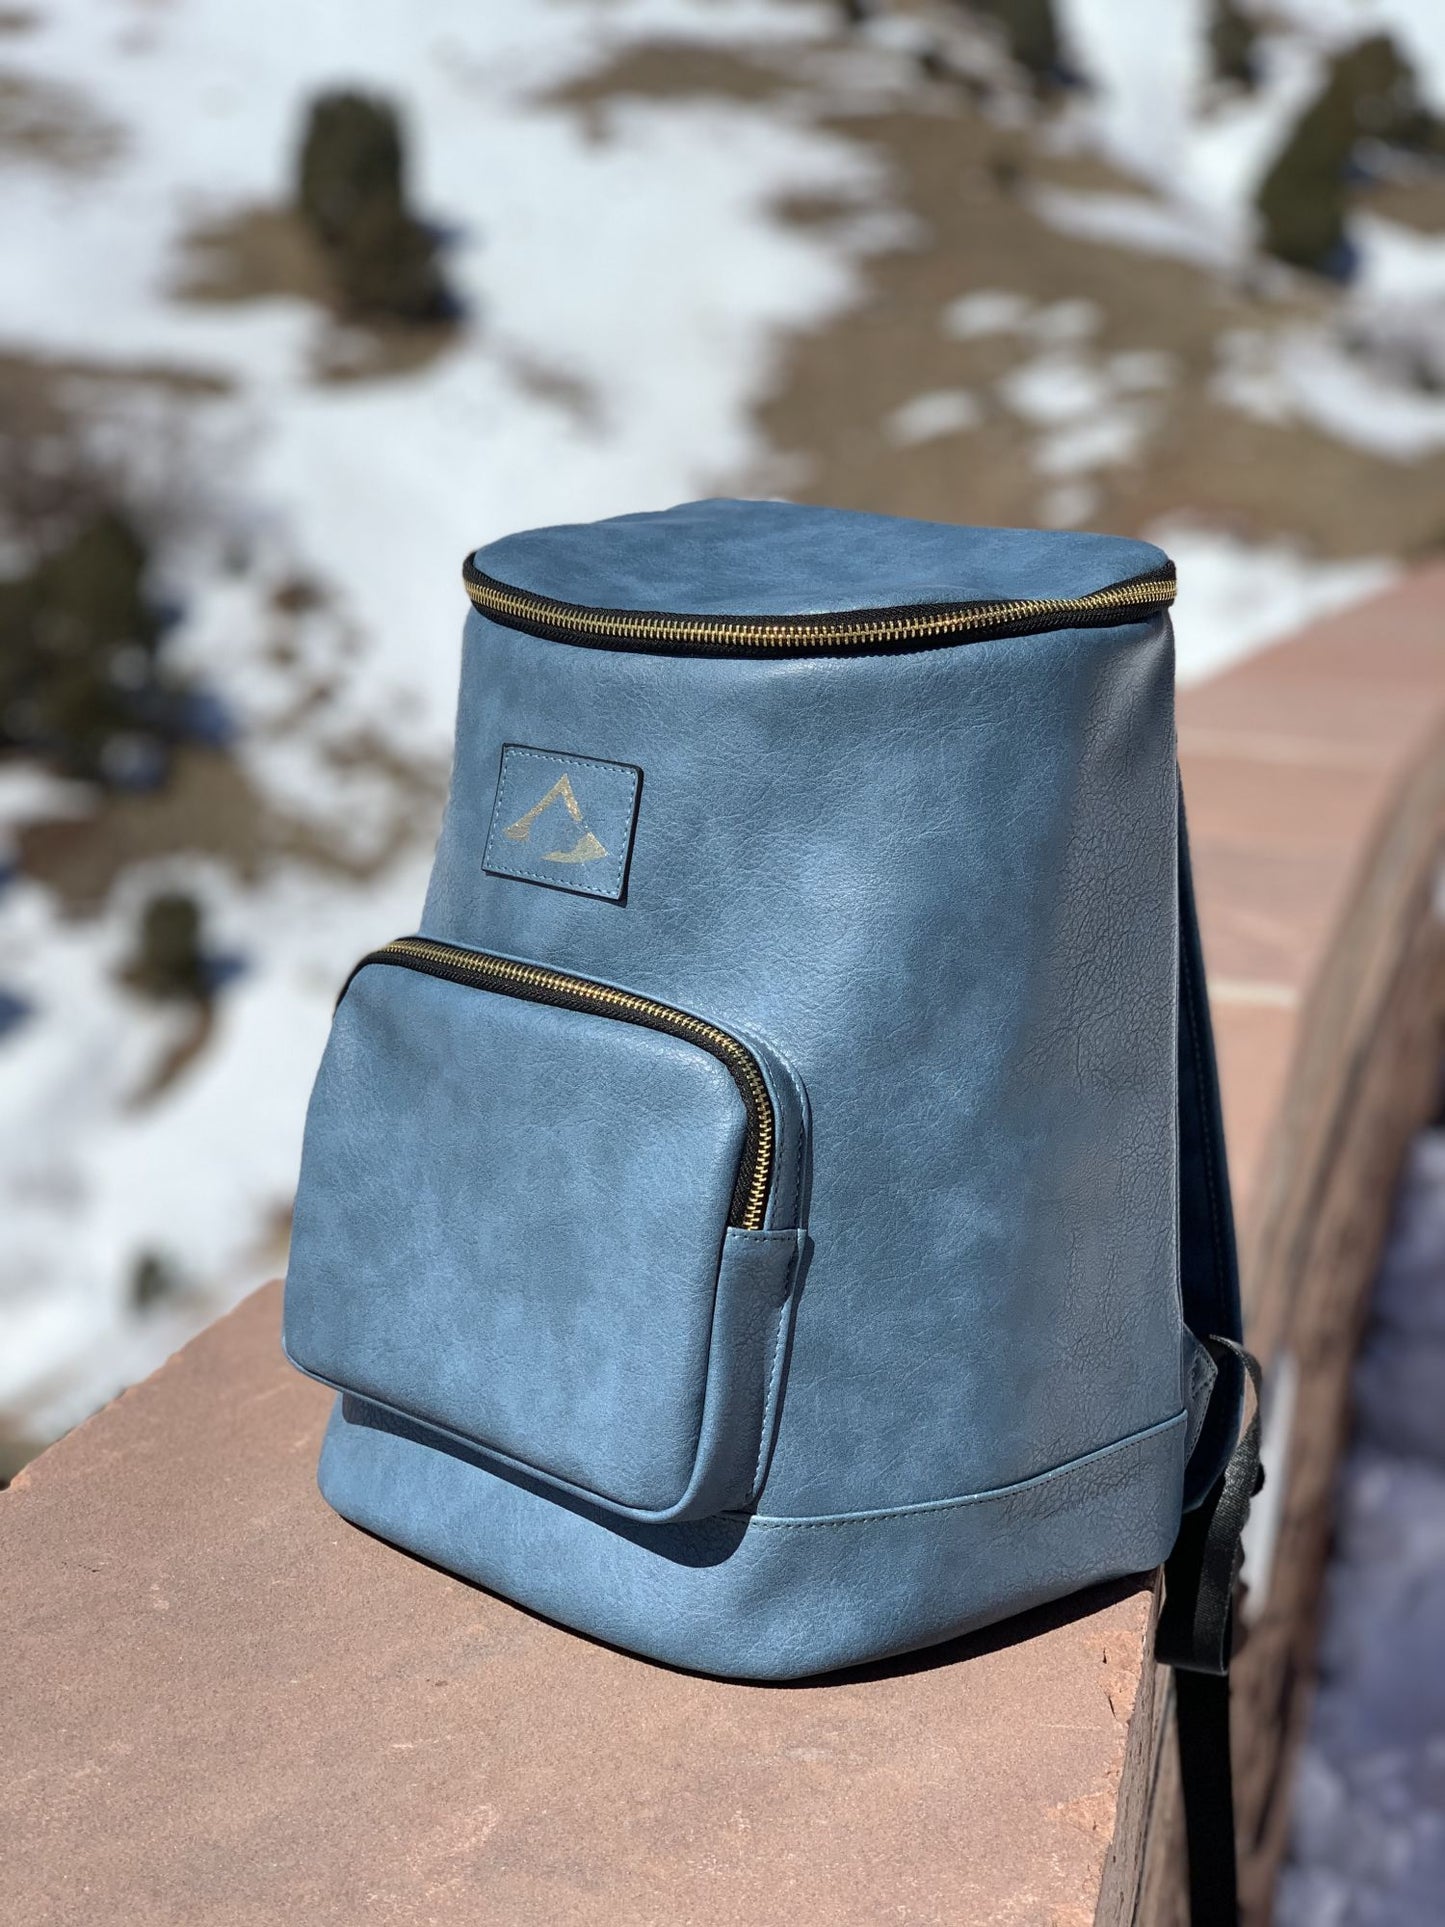 NiceAces’ insulated leakproof and waterproof backpack cooler